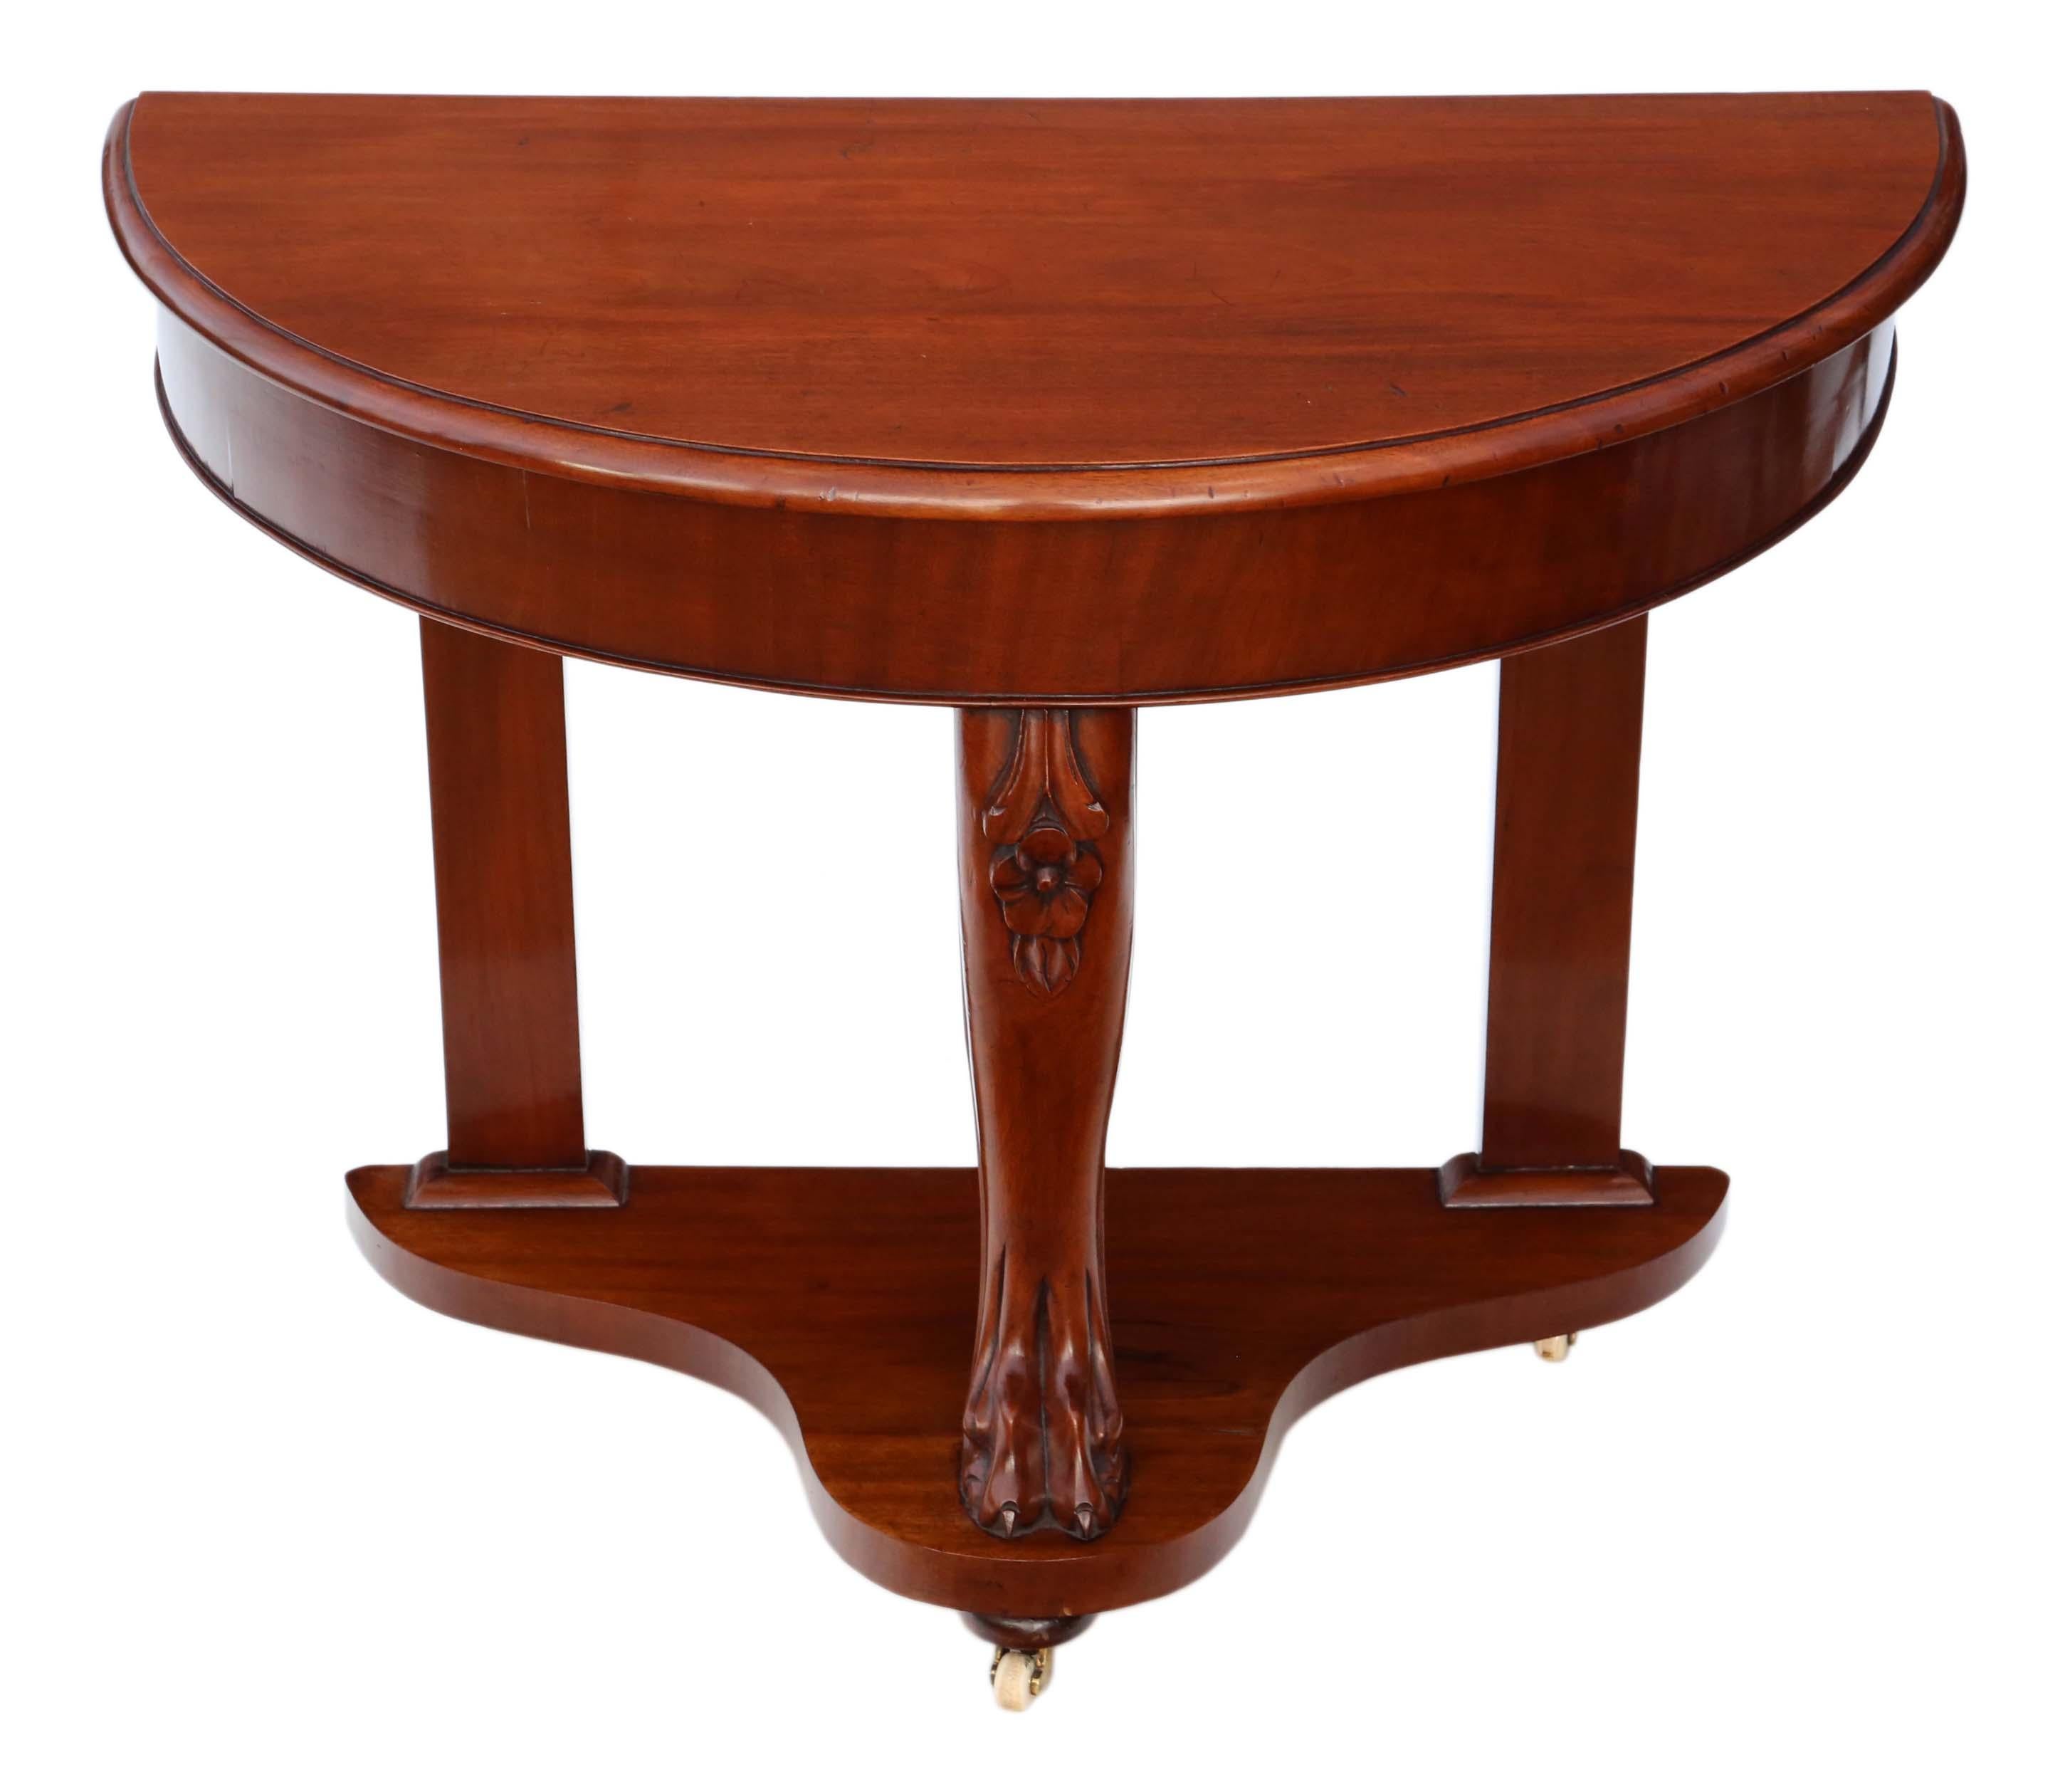 Antique Victorian circa 1890 mahogany demilune console table.
This is a lovely table, that has been fully restored to a high standard.
Solid, with no loose joints. No woodworm. Brass and ceramic castors. Far better than most tables of this